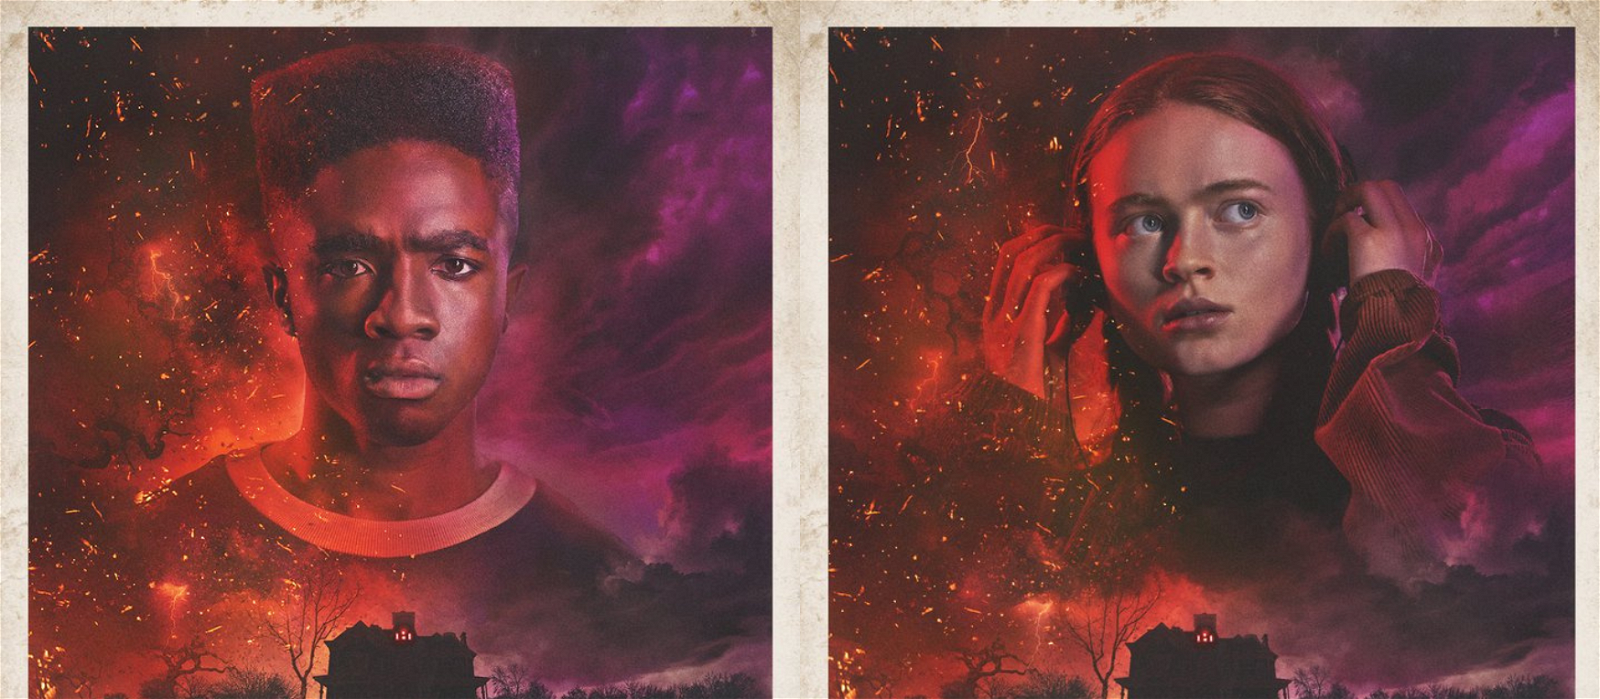 New Posters for ‘Stranger Things’ Reveal an Old and a New Addition to the Cast